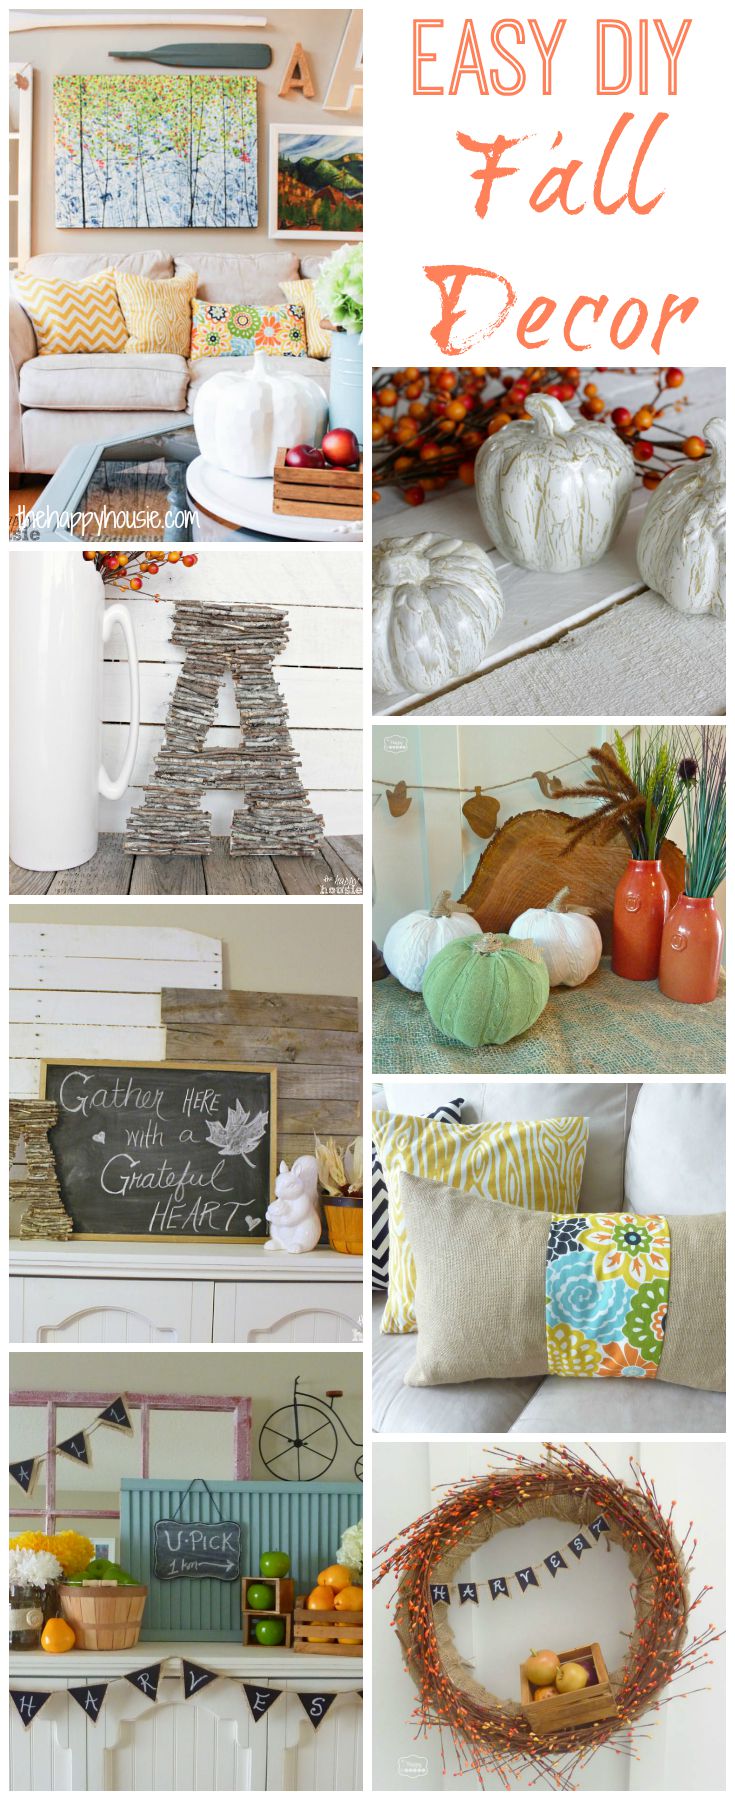 I love all these easy DIY Fall Decor ideas that you could pull together this weekend